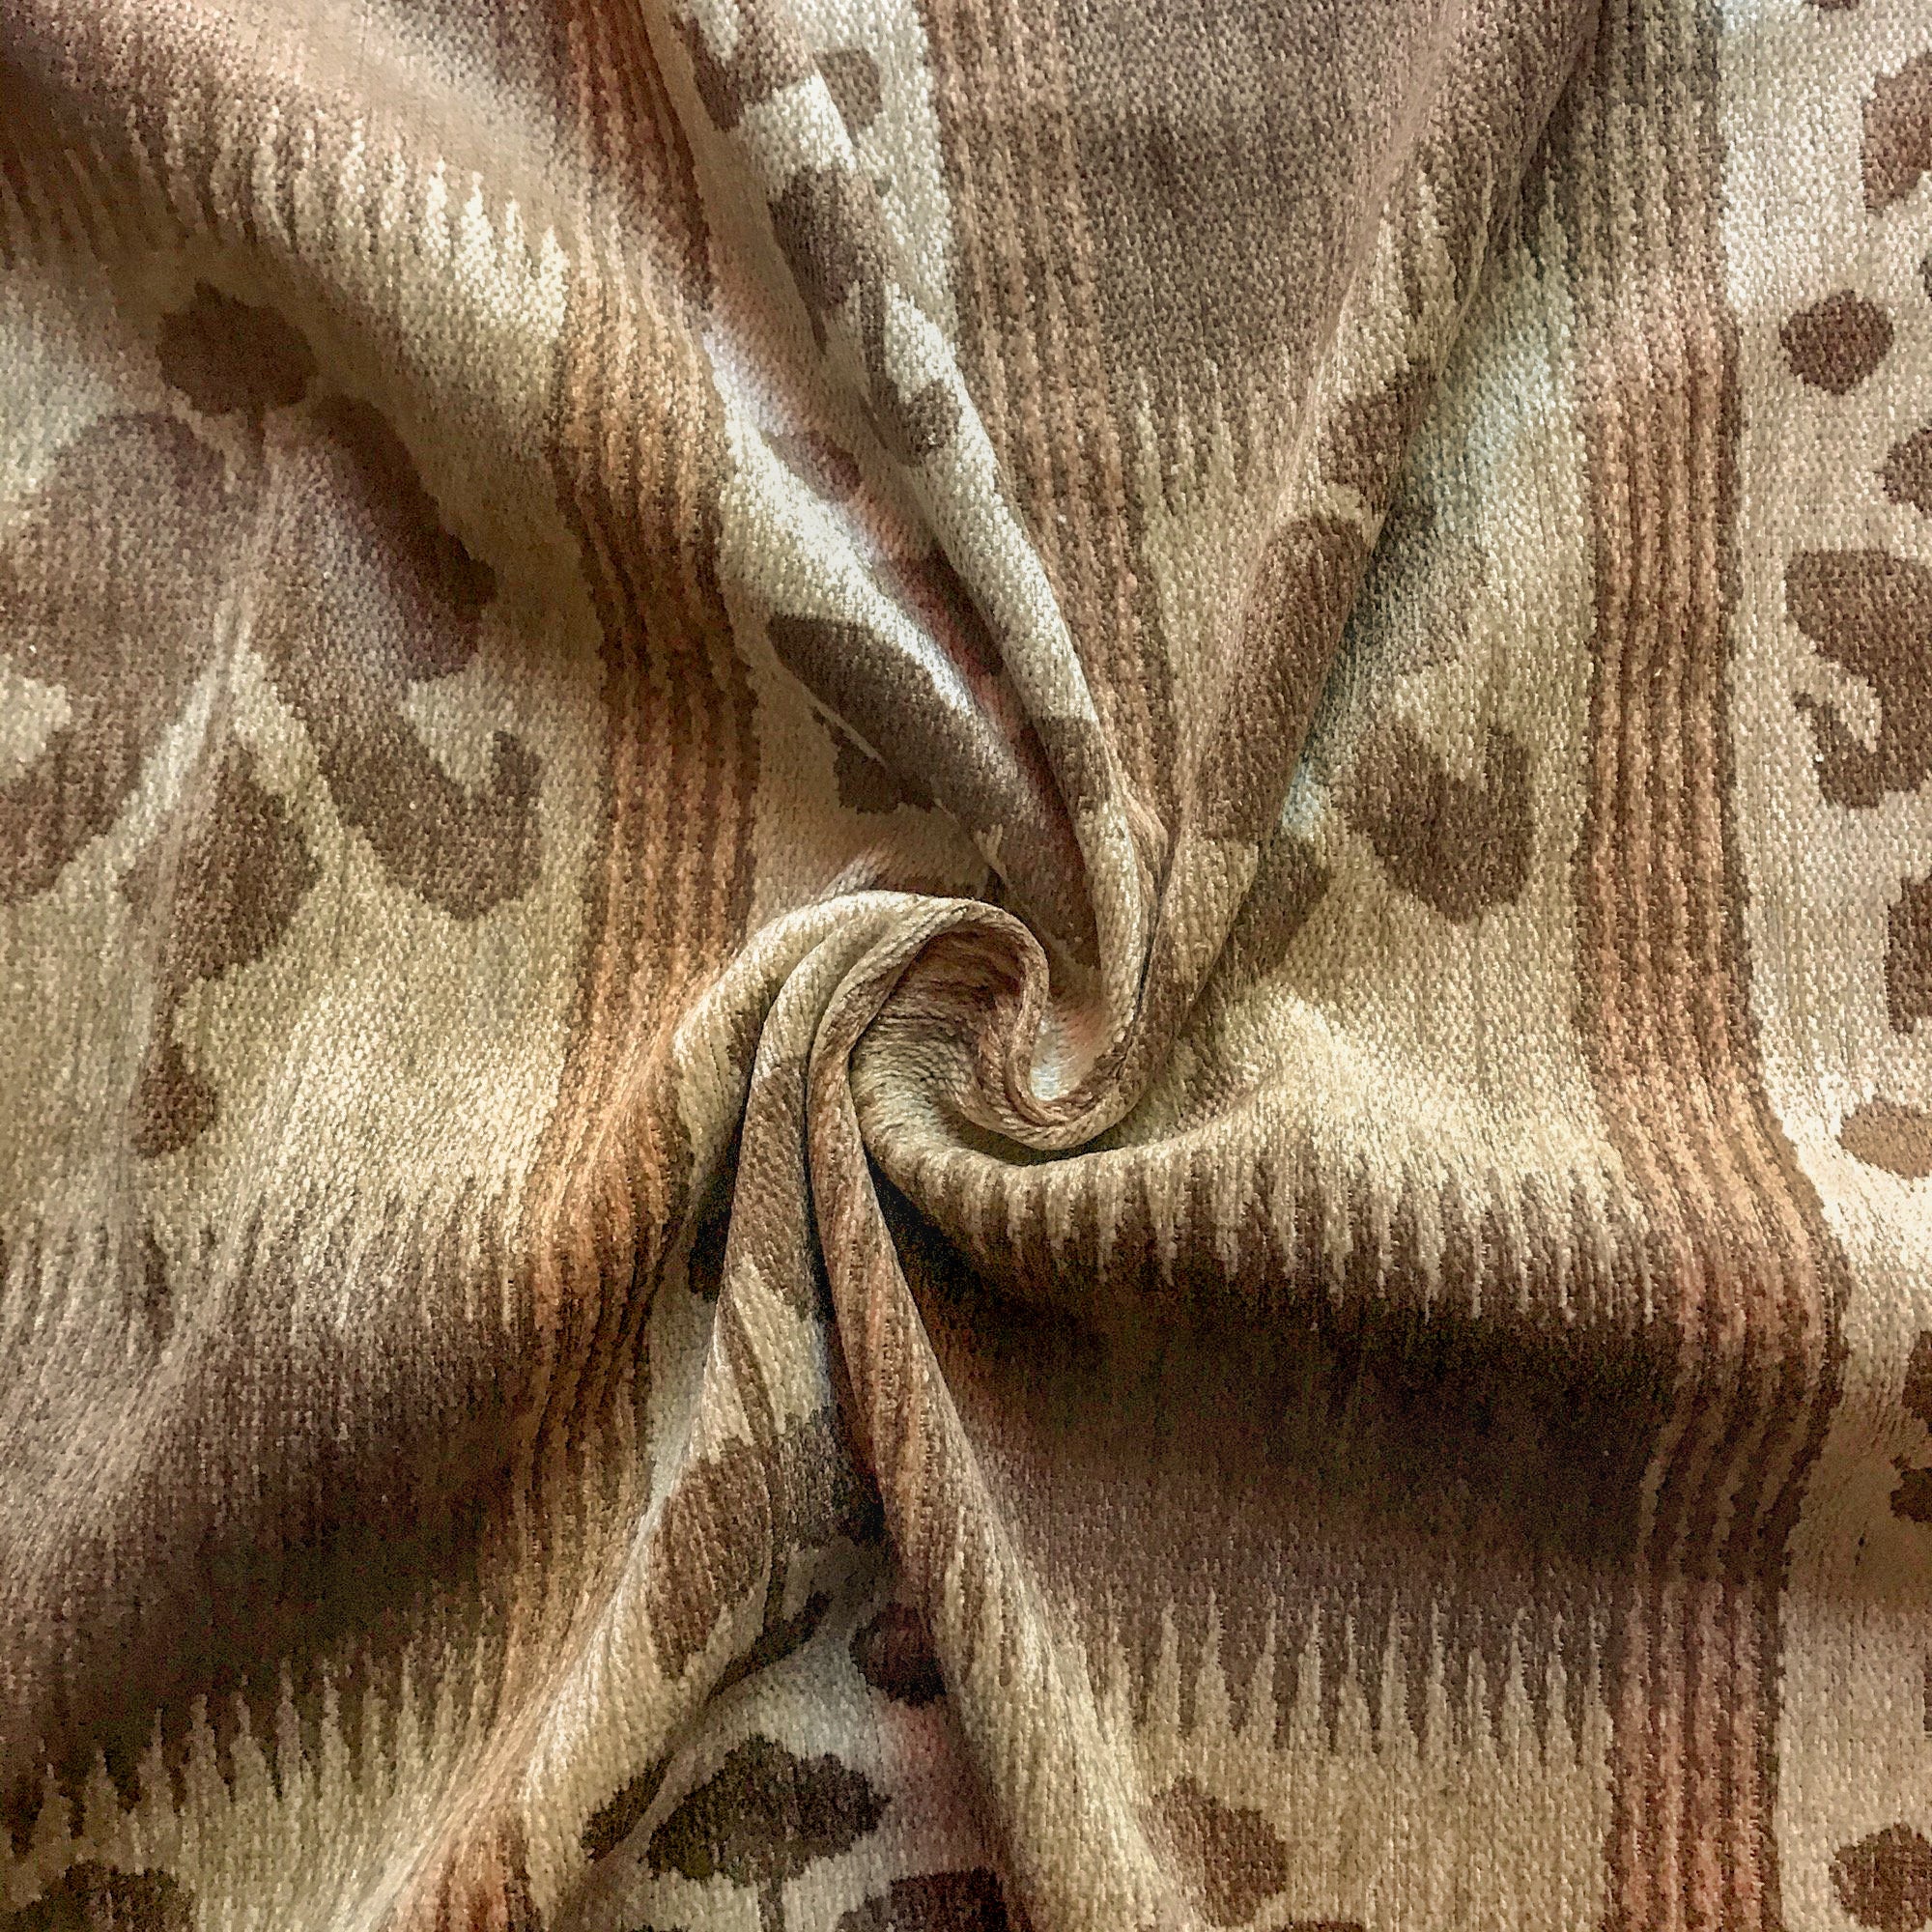 Beige Velvet Fabric, Heavy Upholstery, 54 Wide, By the Yard